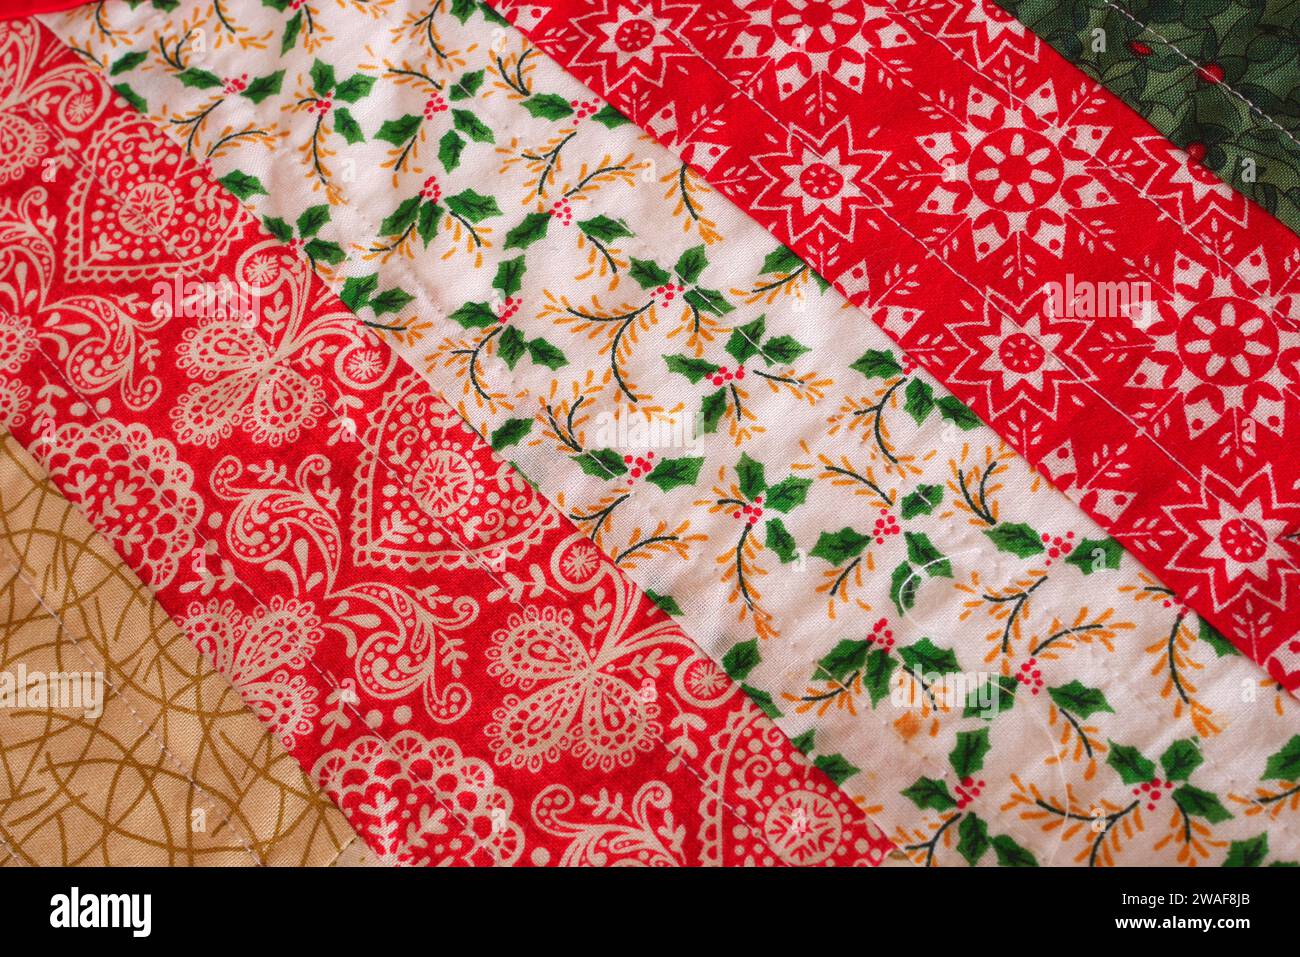 Detail of a hand-stitched Christmas table runner Stock Photo